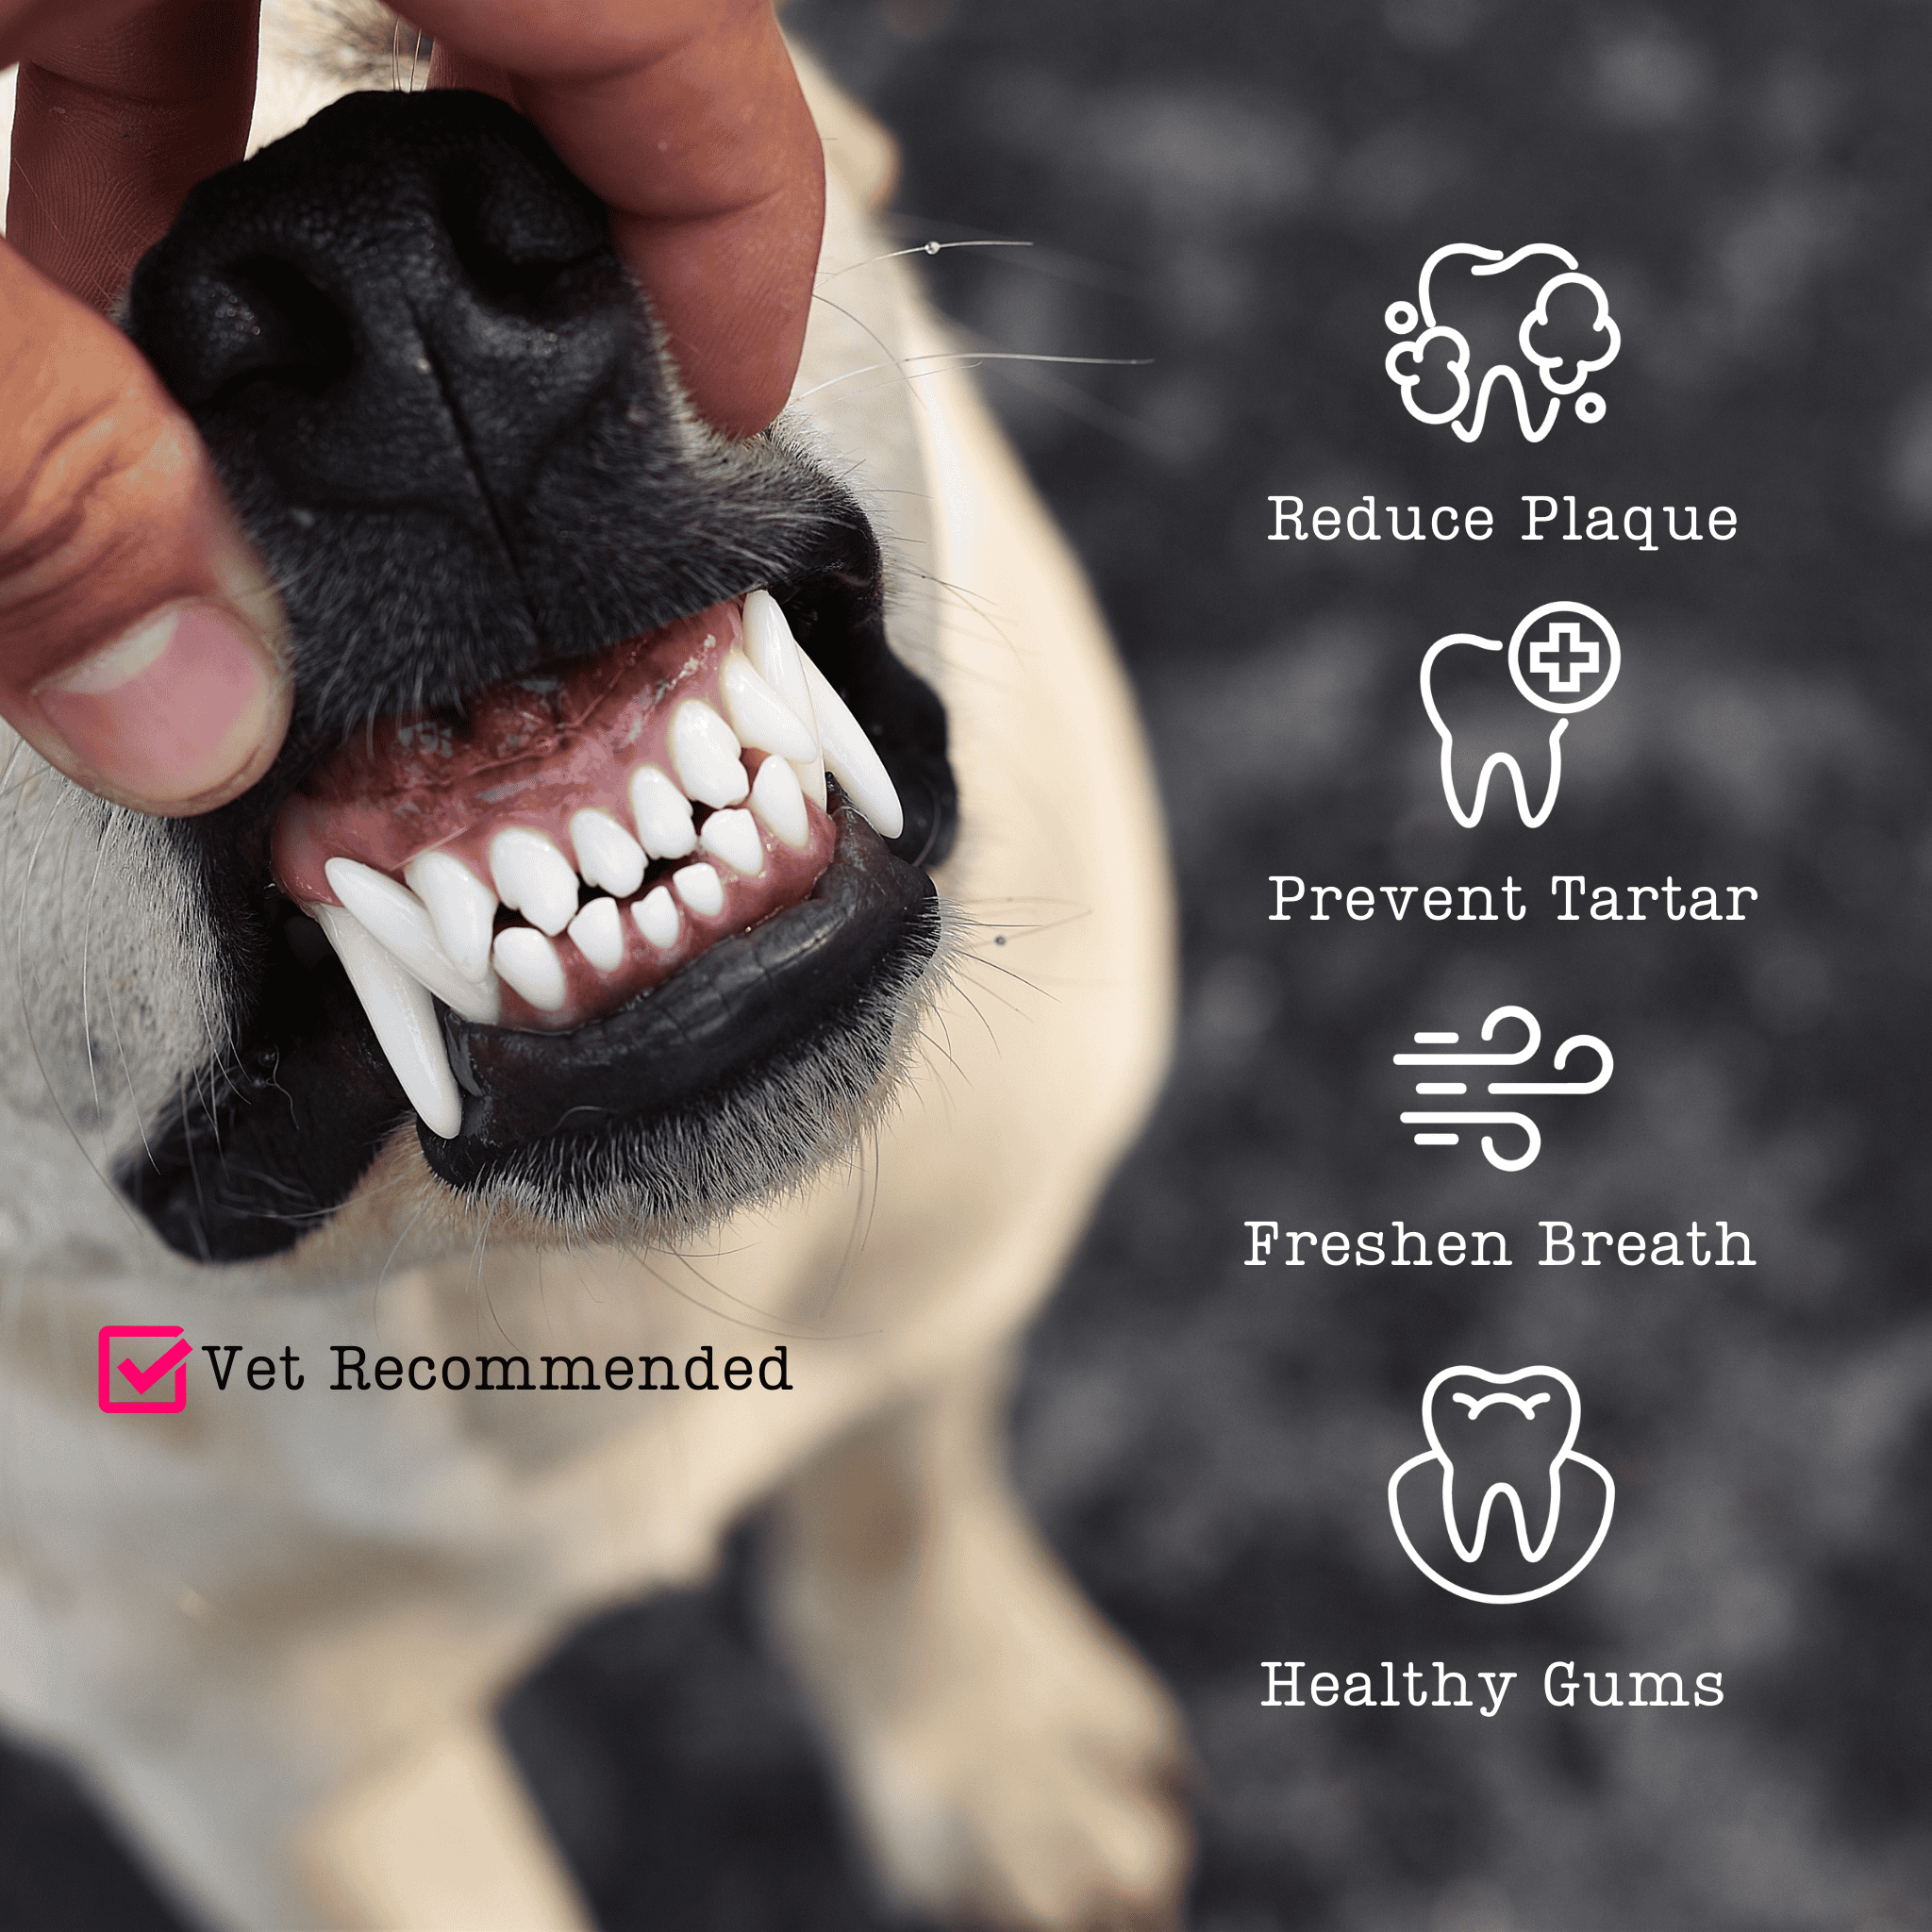 A Close-Up Of A Dog'S Teeth Being Examined By A Person'S Hand, Illustrating The Benefits Of Dentamax Dental Powder For Dogs And Cats Reducing Plaque, Preventing Tartar, Freshening Breath, And Promoting Healthy Gums.